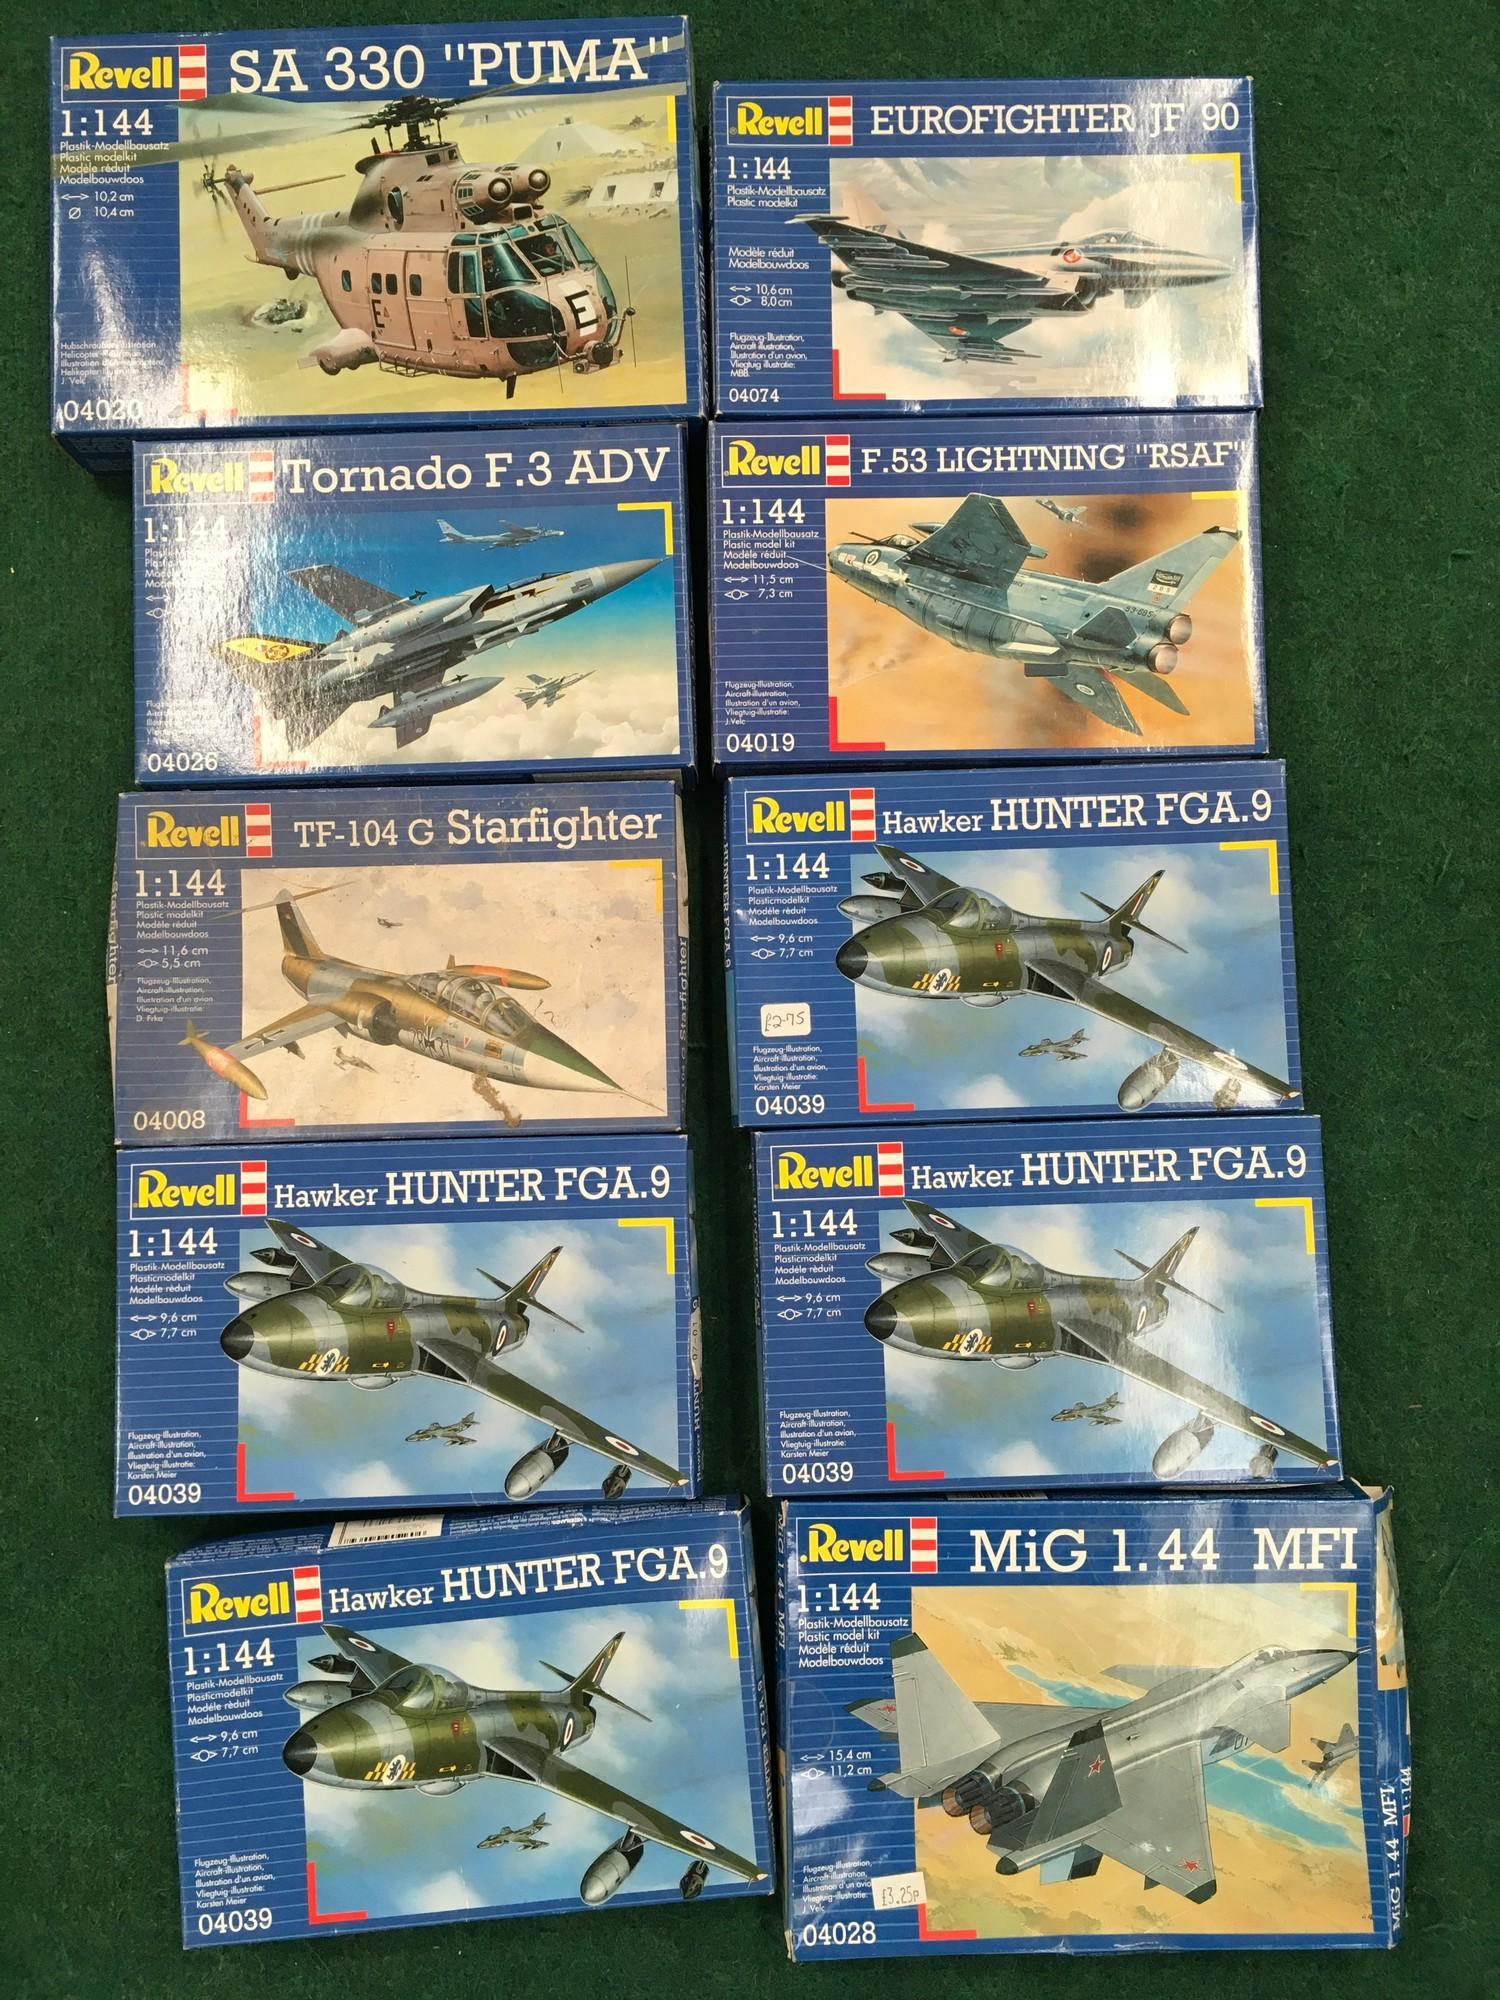 Ten Revell model kits to include Tornado F.3 ADV, F.53 Lighting "RSAF" and others. All seem complete